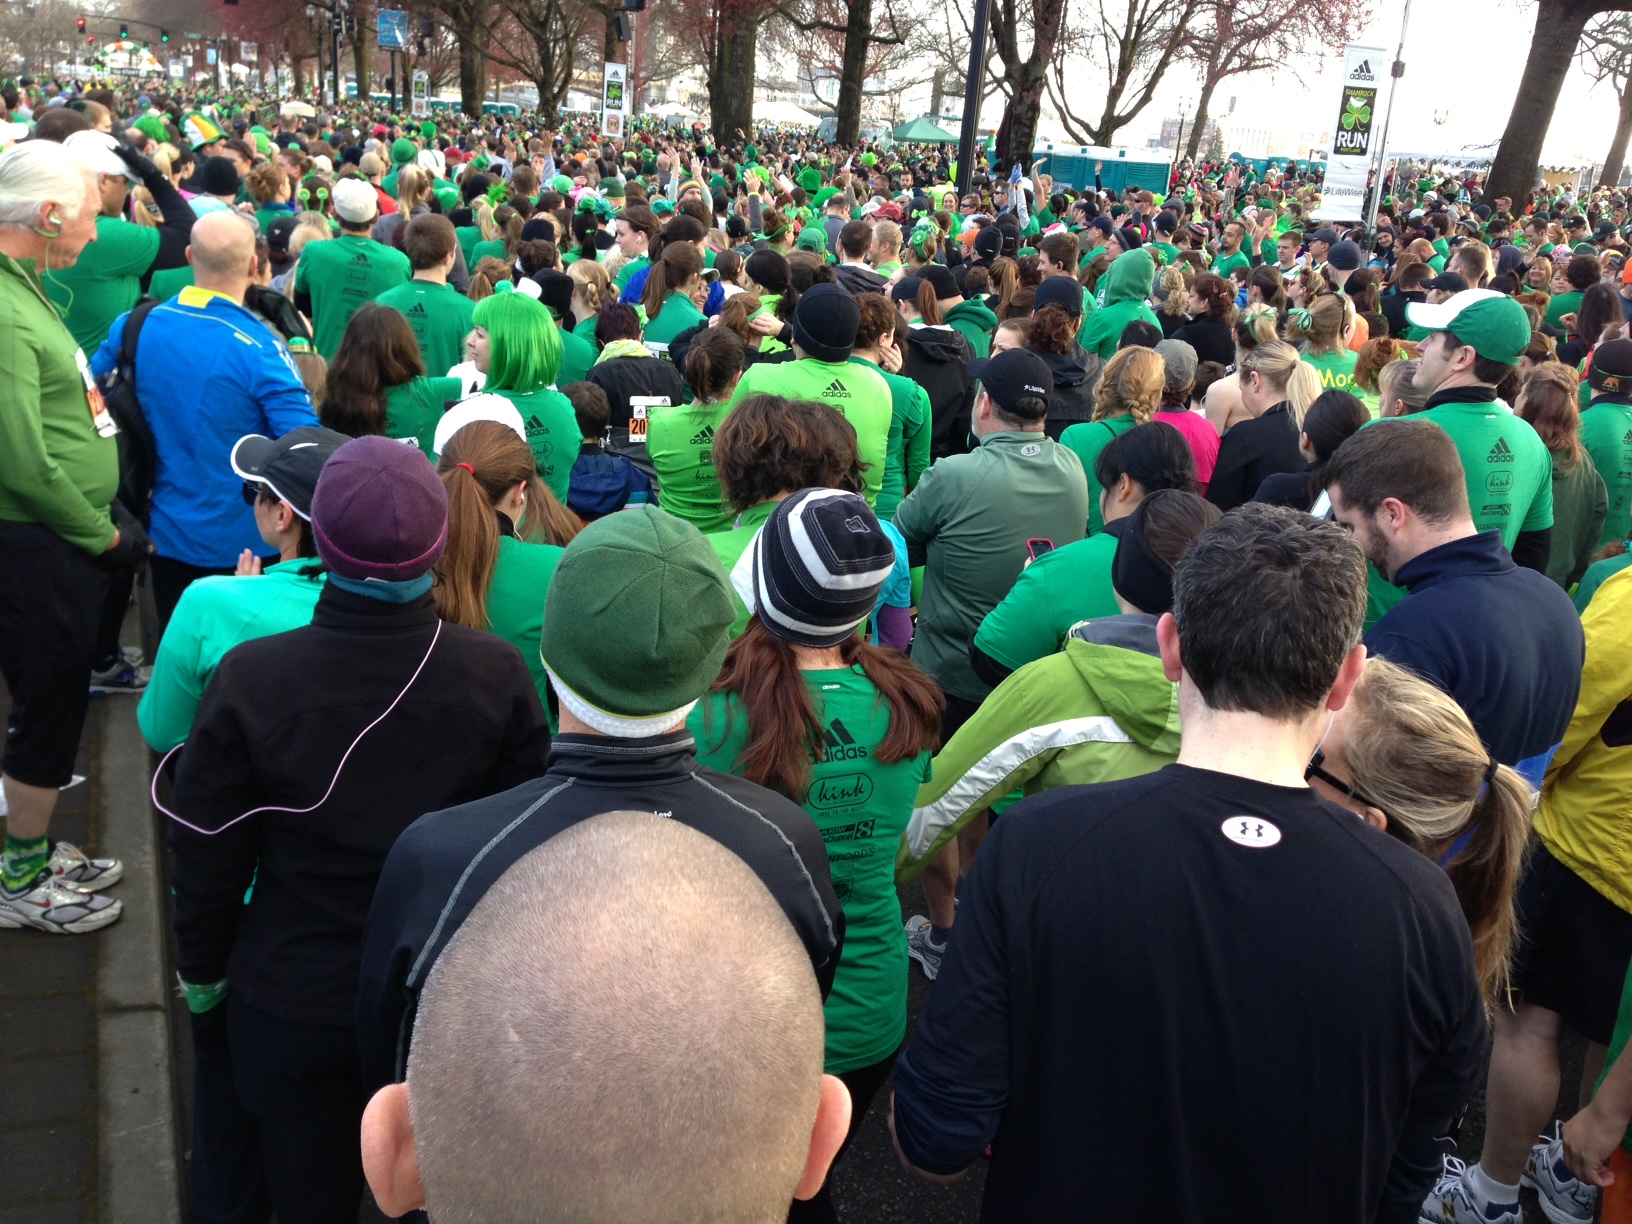 This was my view at the start. If you look really closely, you can almost see the actual starting line archway.